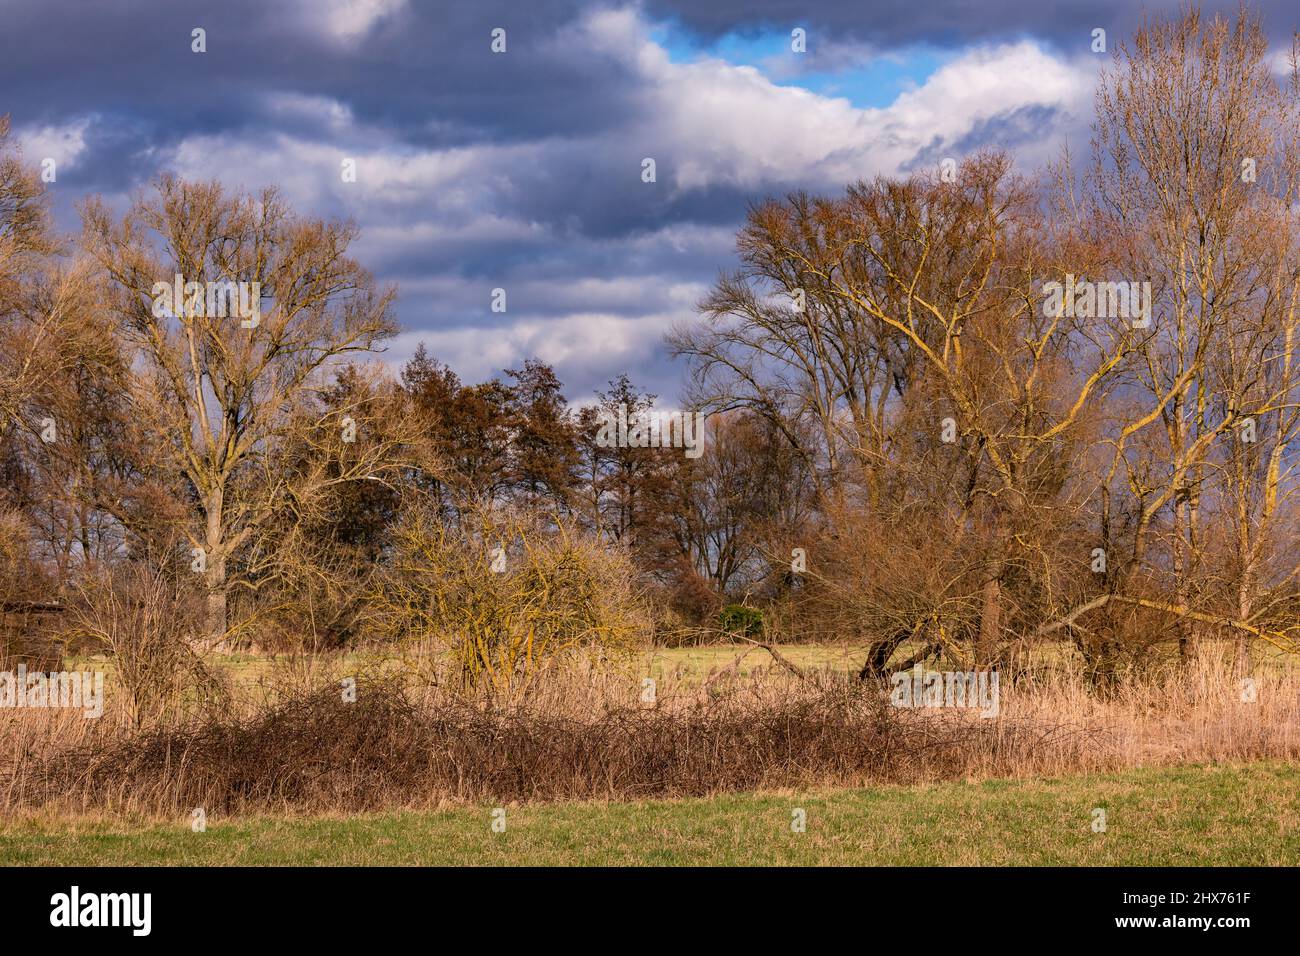 A rural landscape with a meadow, trees and shrubs spectacularly lit by the sun Stock Photo